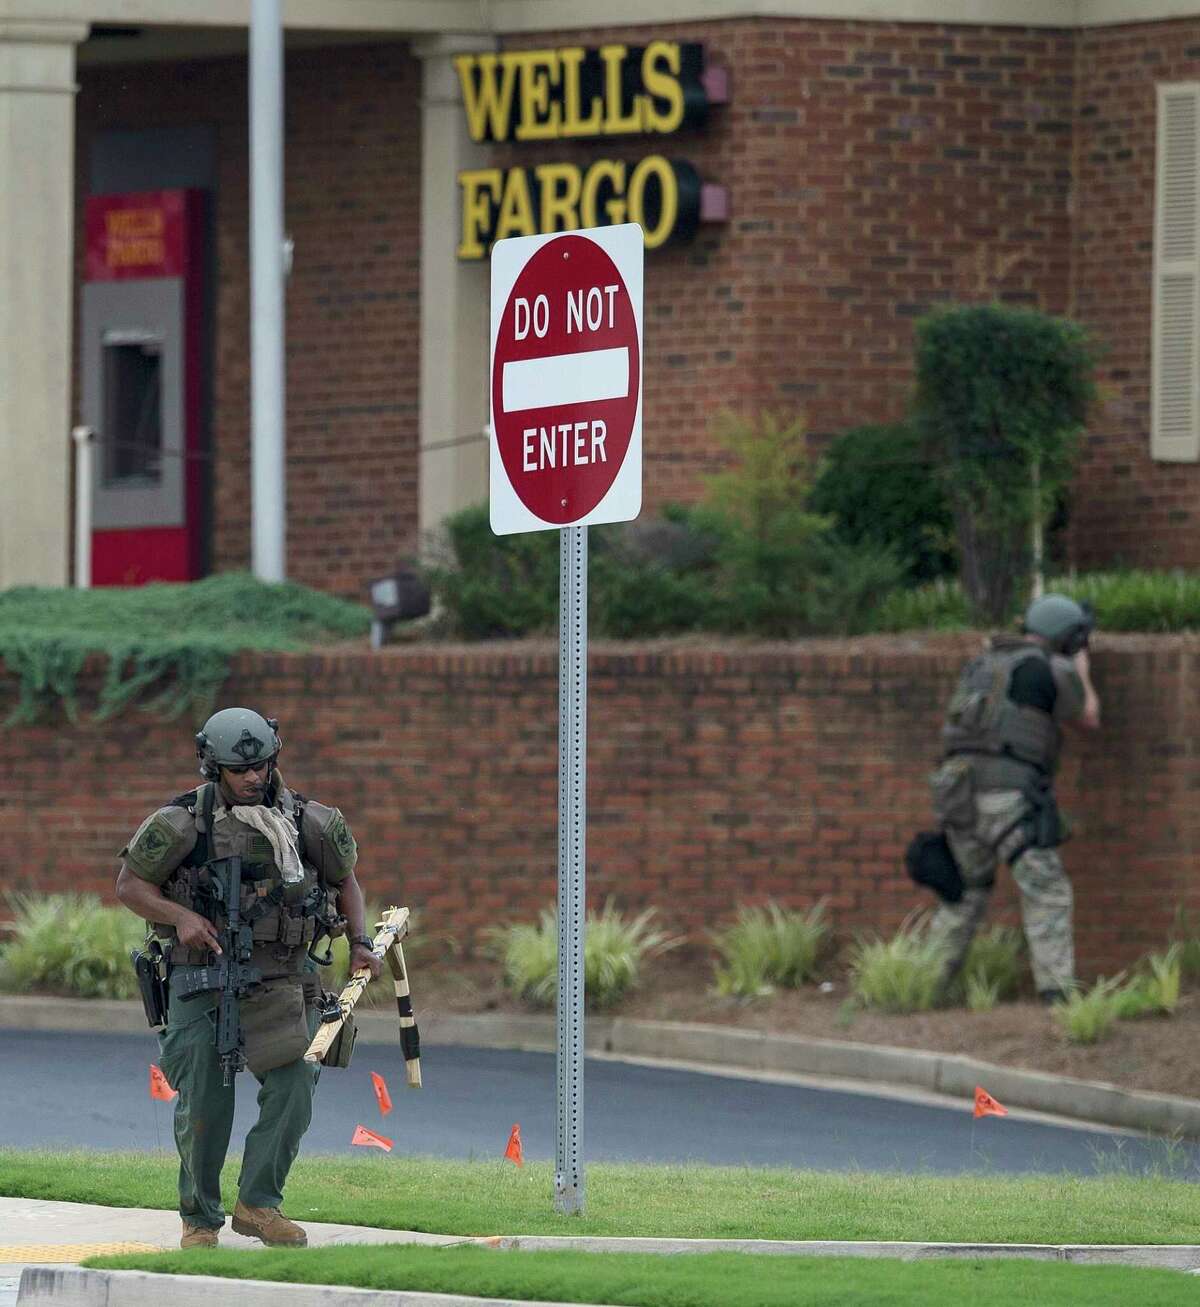 Police officers move away from a Wells Fargo Bank, Friday, July 7, 2017 in Marietta, Ga. A man who claimed to have a bomb that could "take out the room" barricaded himself inside a suburban Atlanta bank Friday, sparking an hours-long standoff that forced police to bust through a brick wall of the building and later ended with the suspect's death.(AP Photo/Mike Stewart)